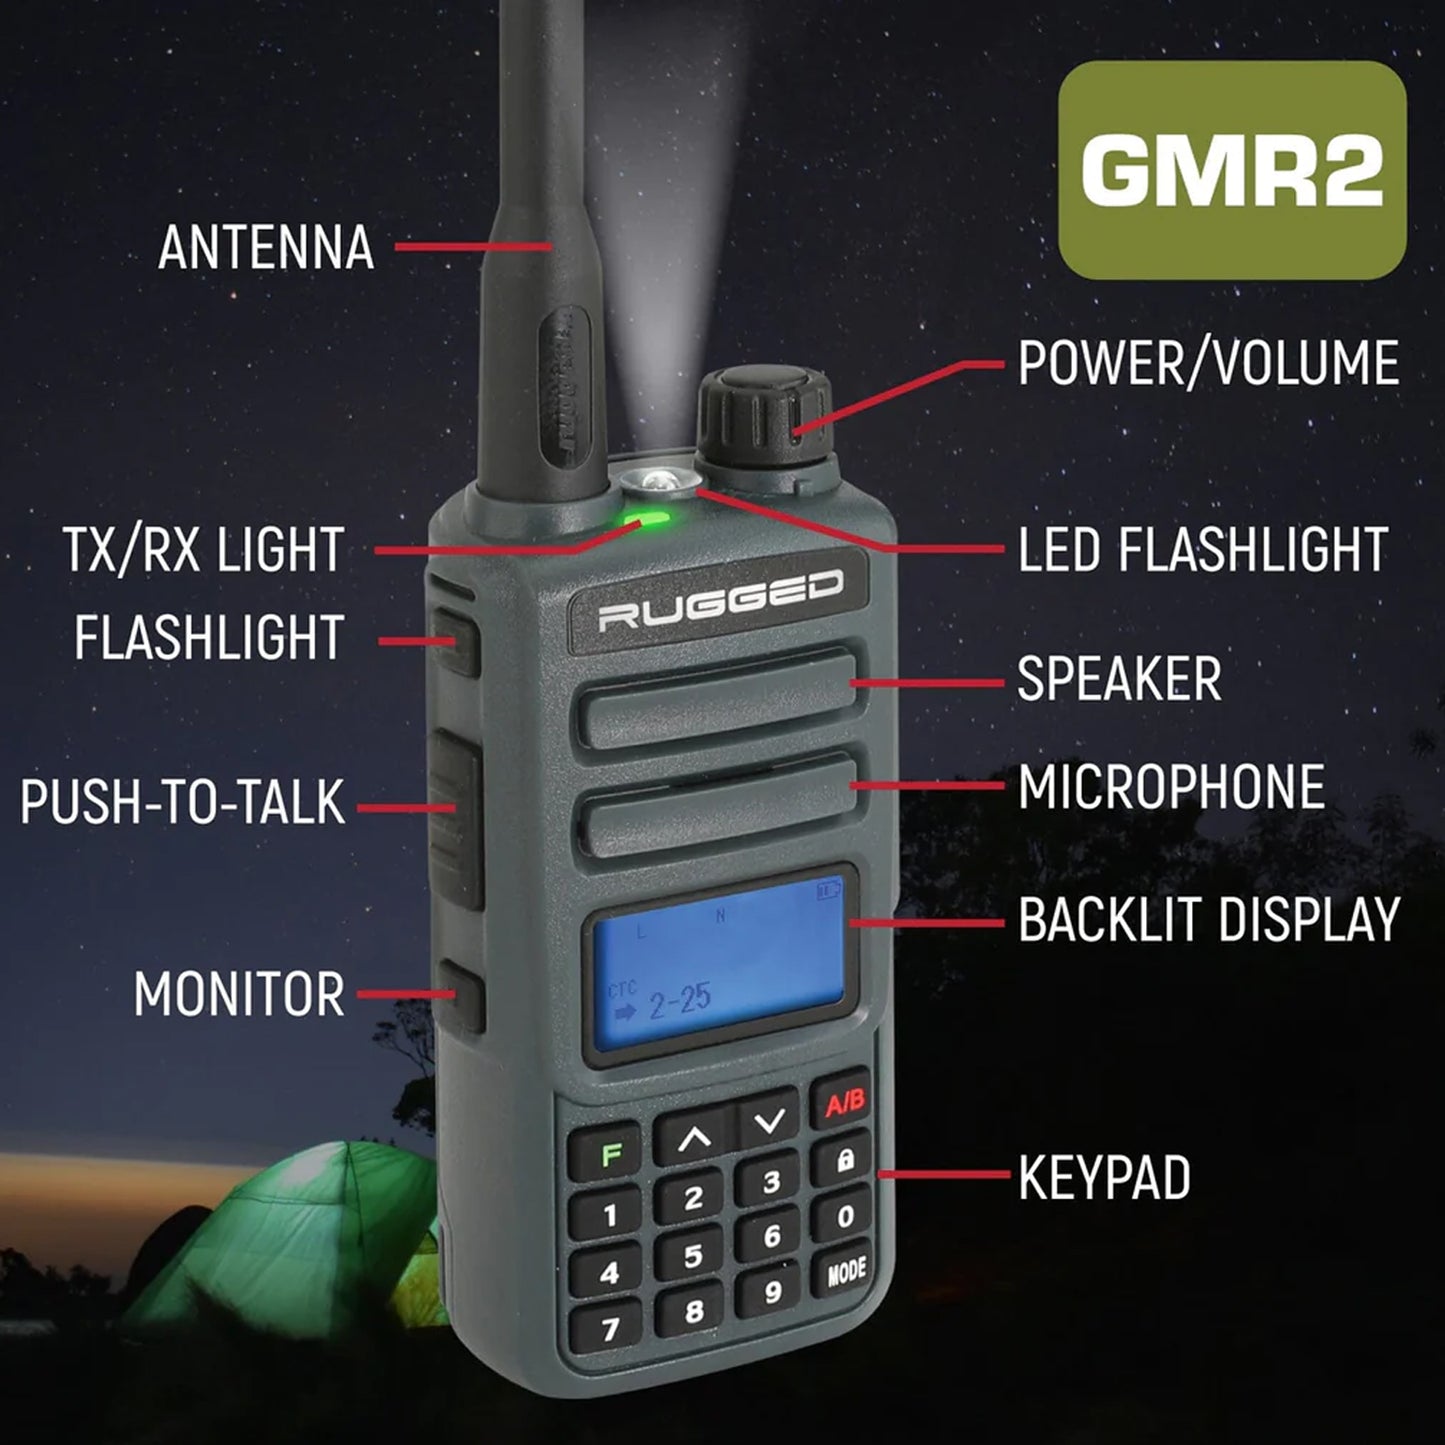 ADVENTURE PACK - Rugged GMR2 GMRS and FRS Hand Held Radios pair